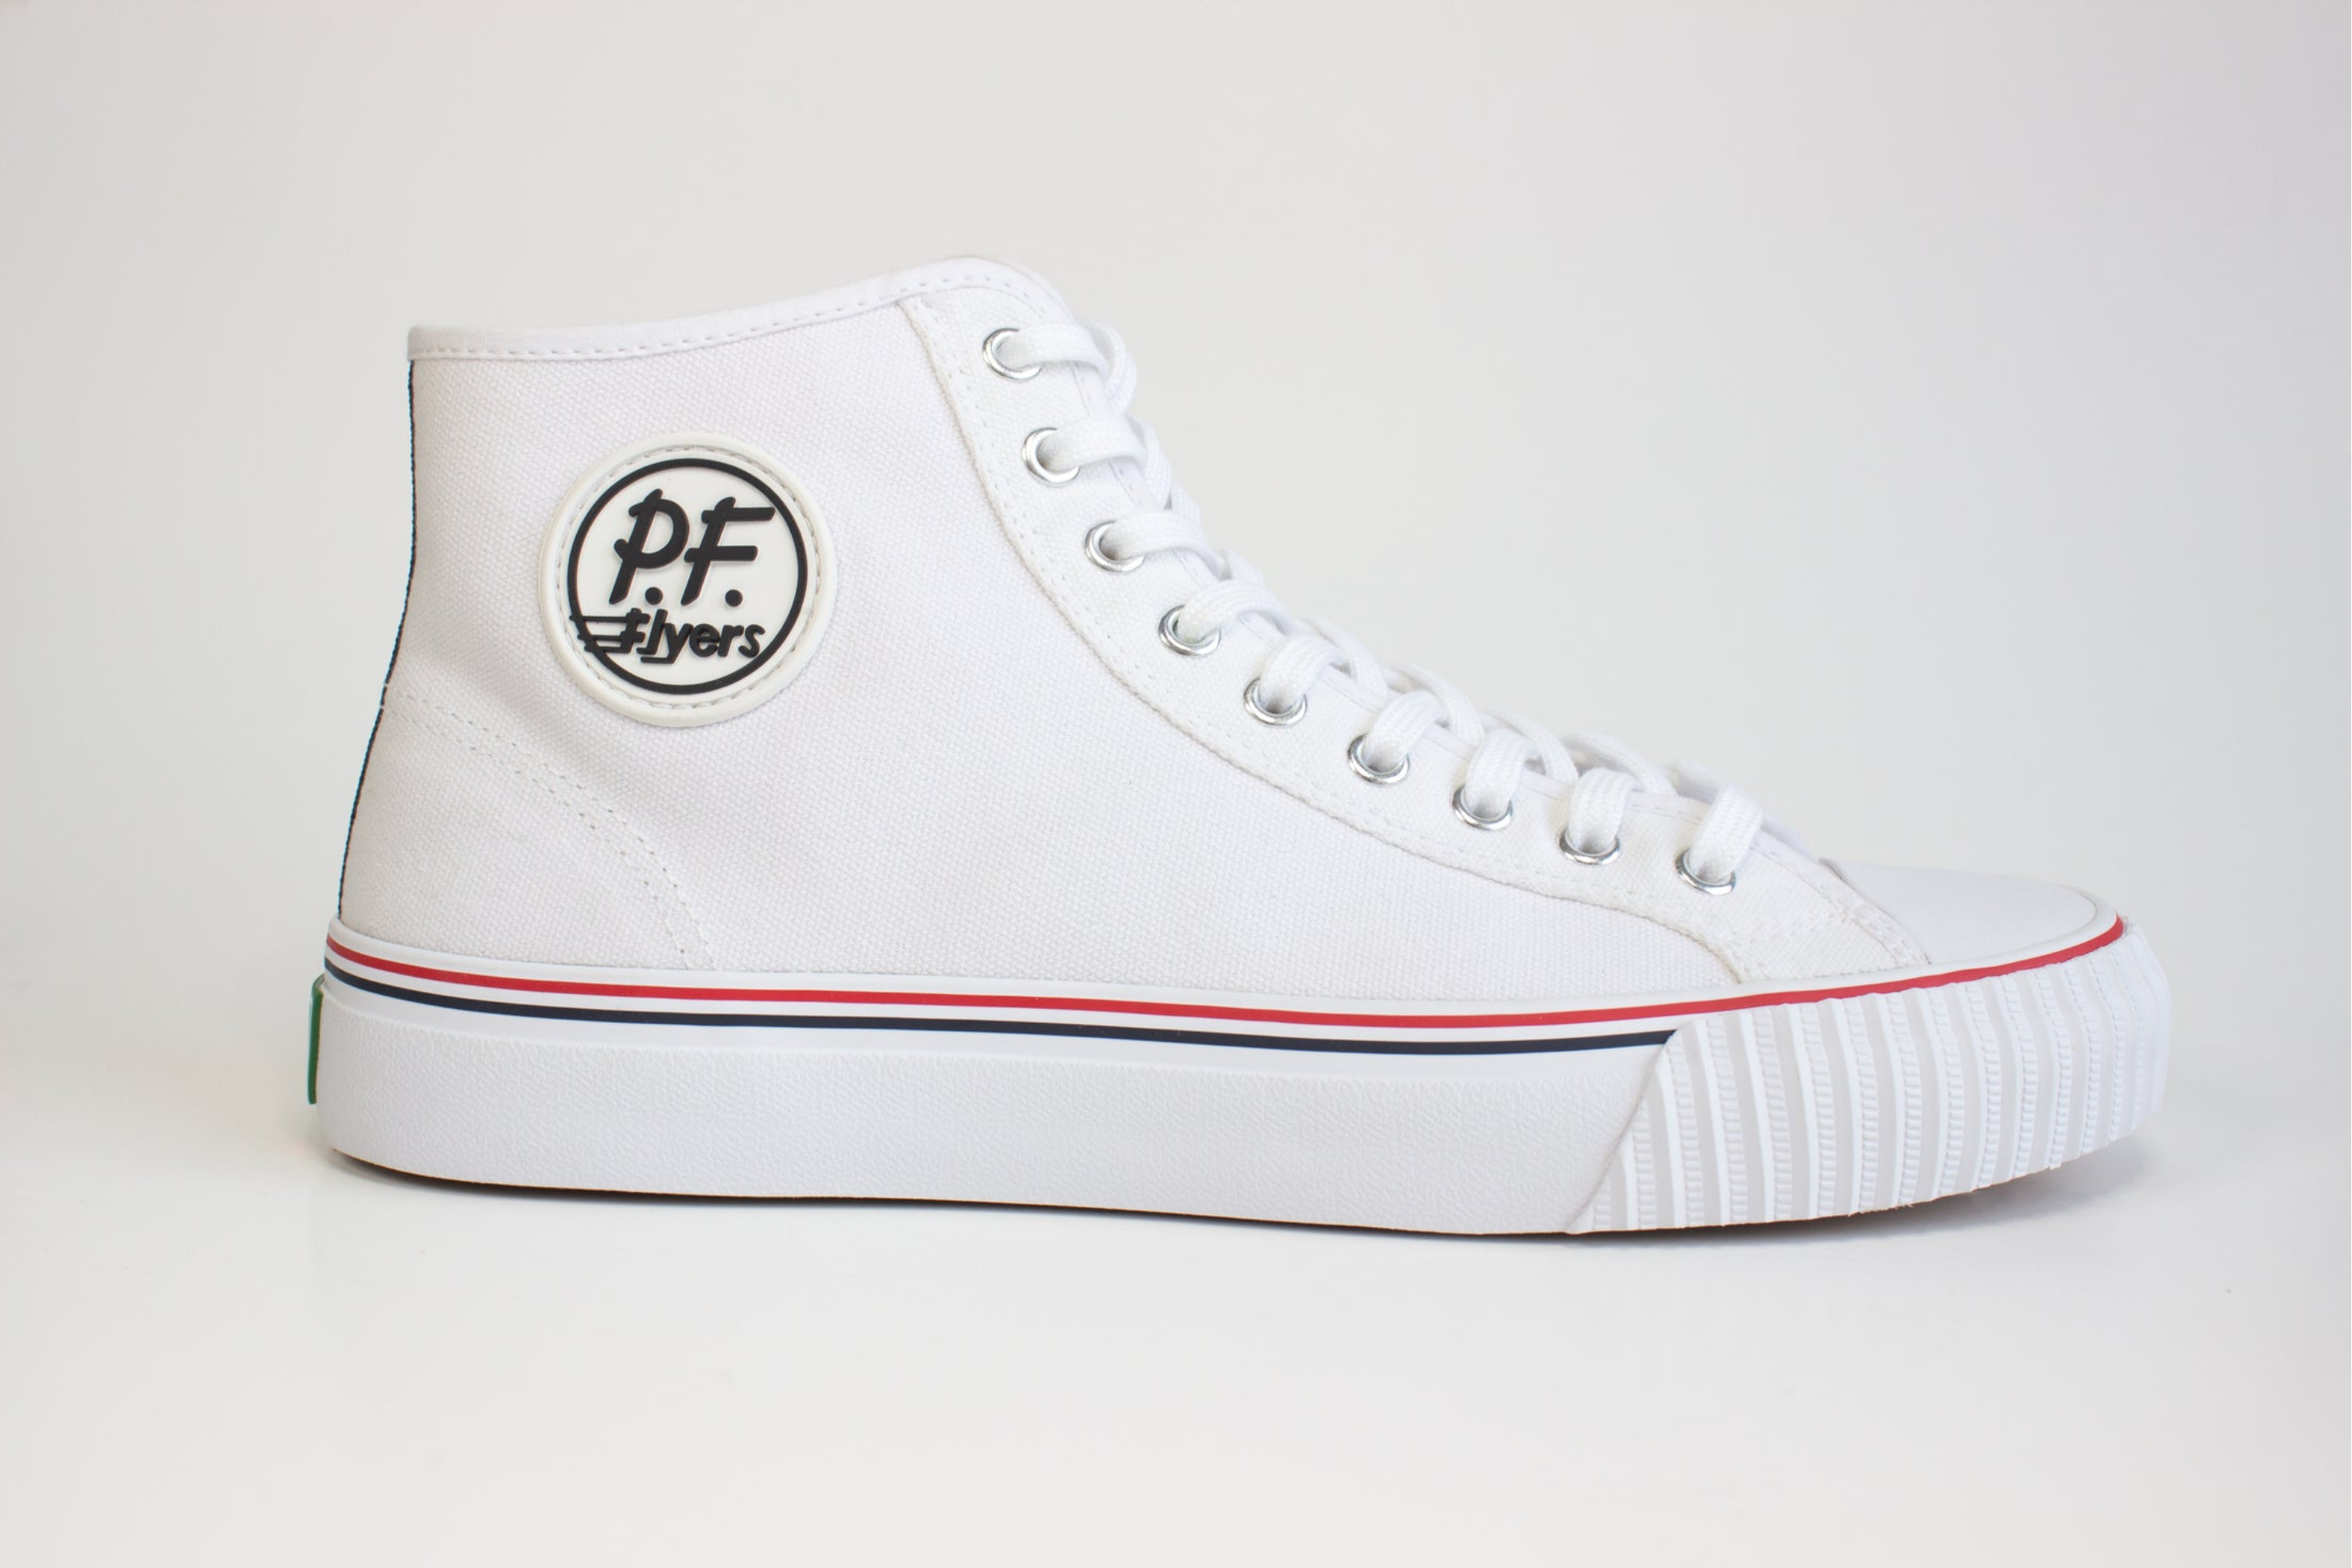 Total 45+ imagen pf flyers shoes for sale - Abzlocal.mx